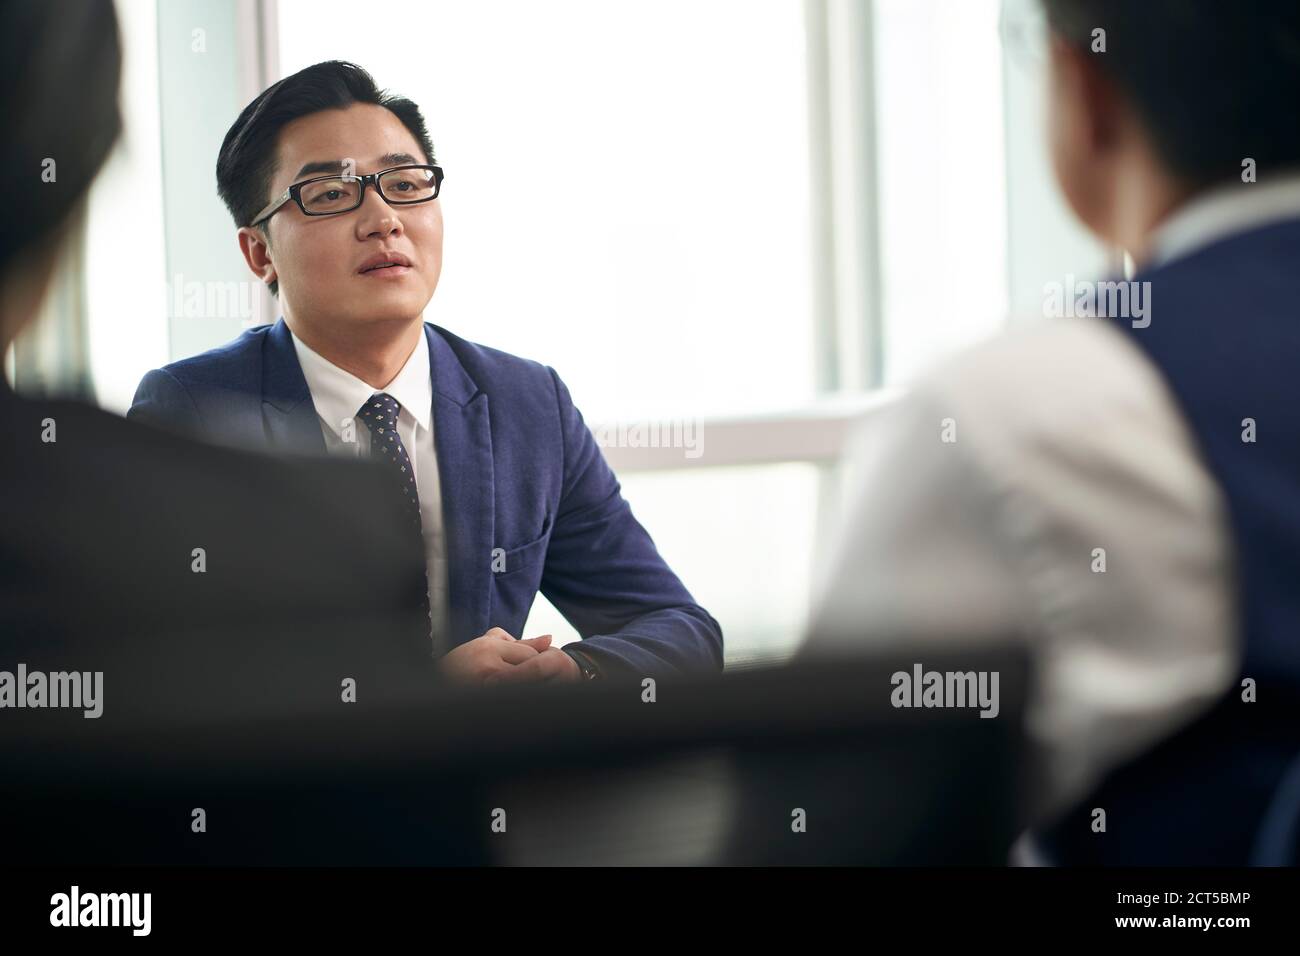 young asian business man talking to interviewer during job interview Stock Photo